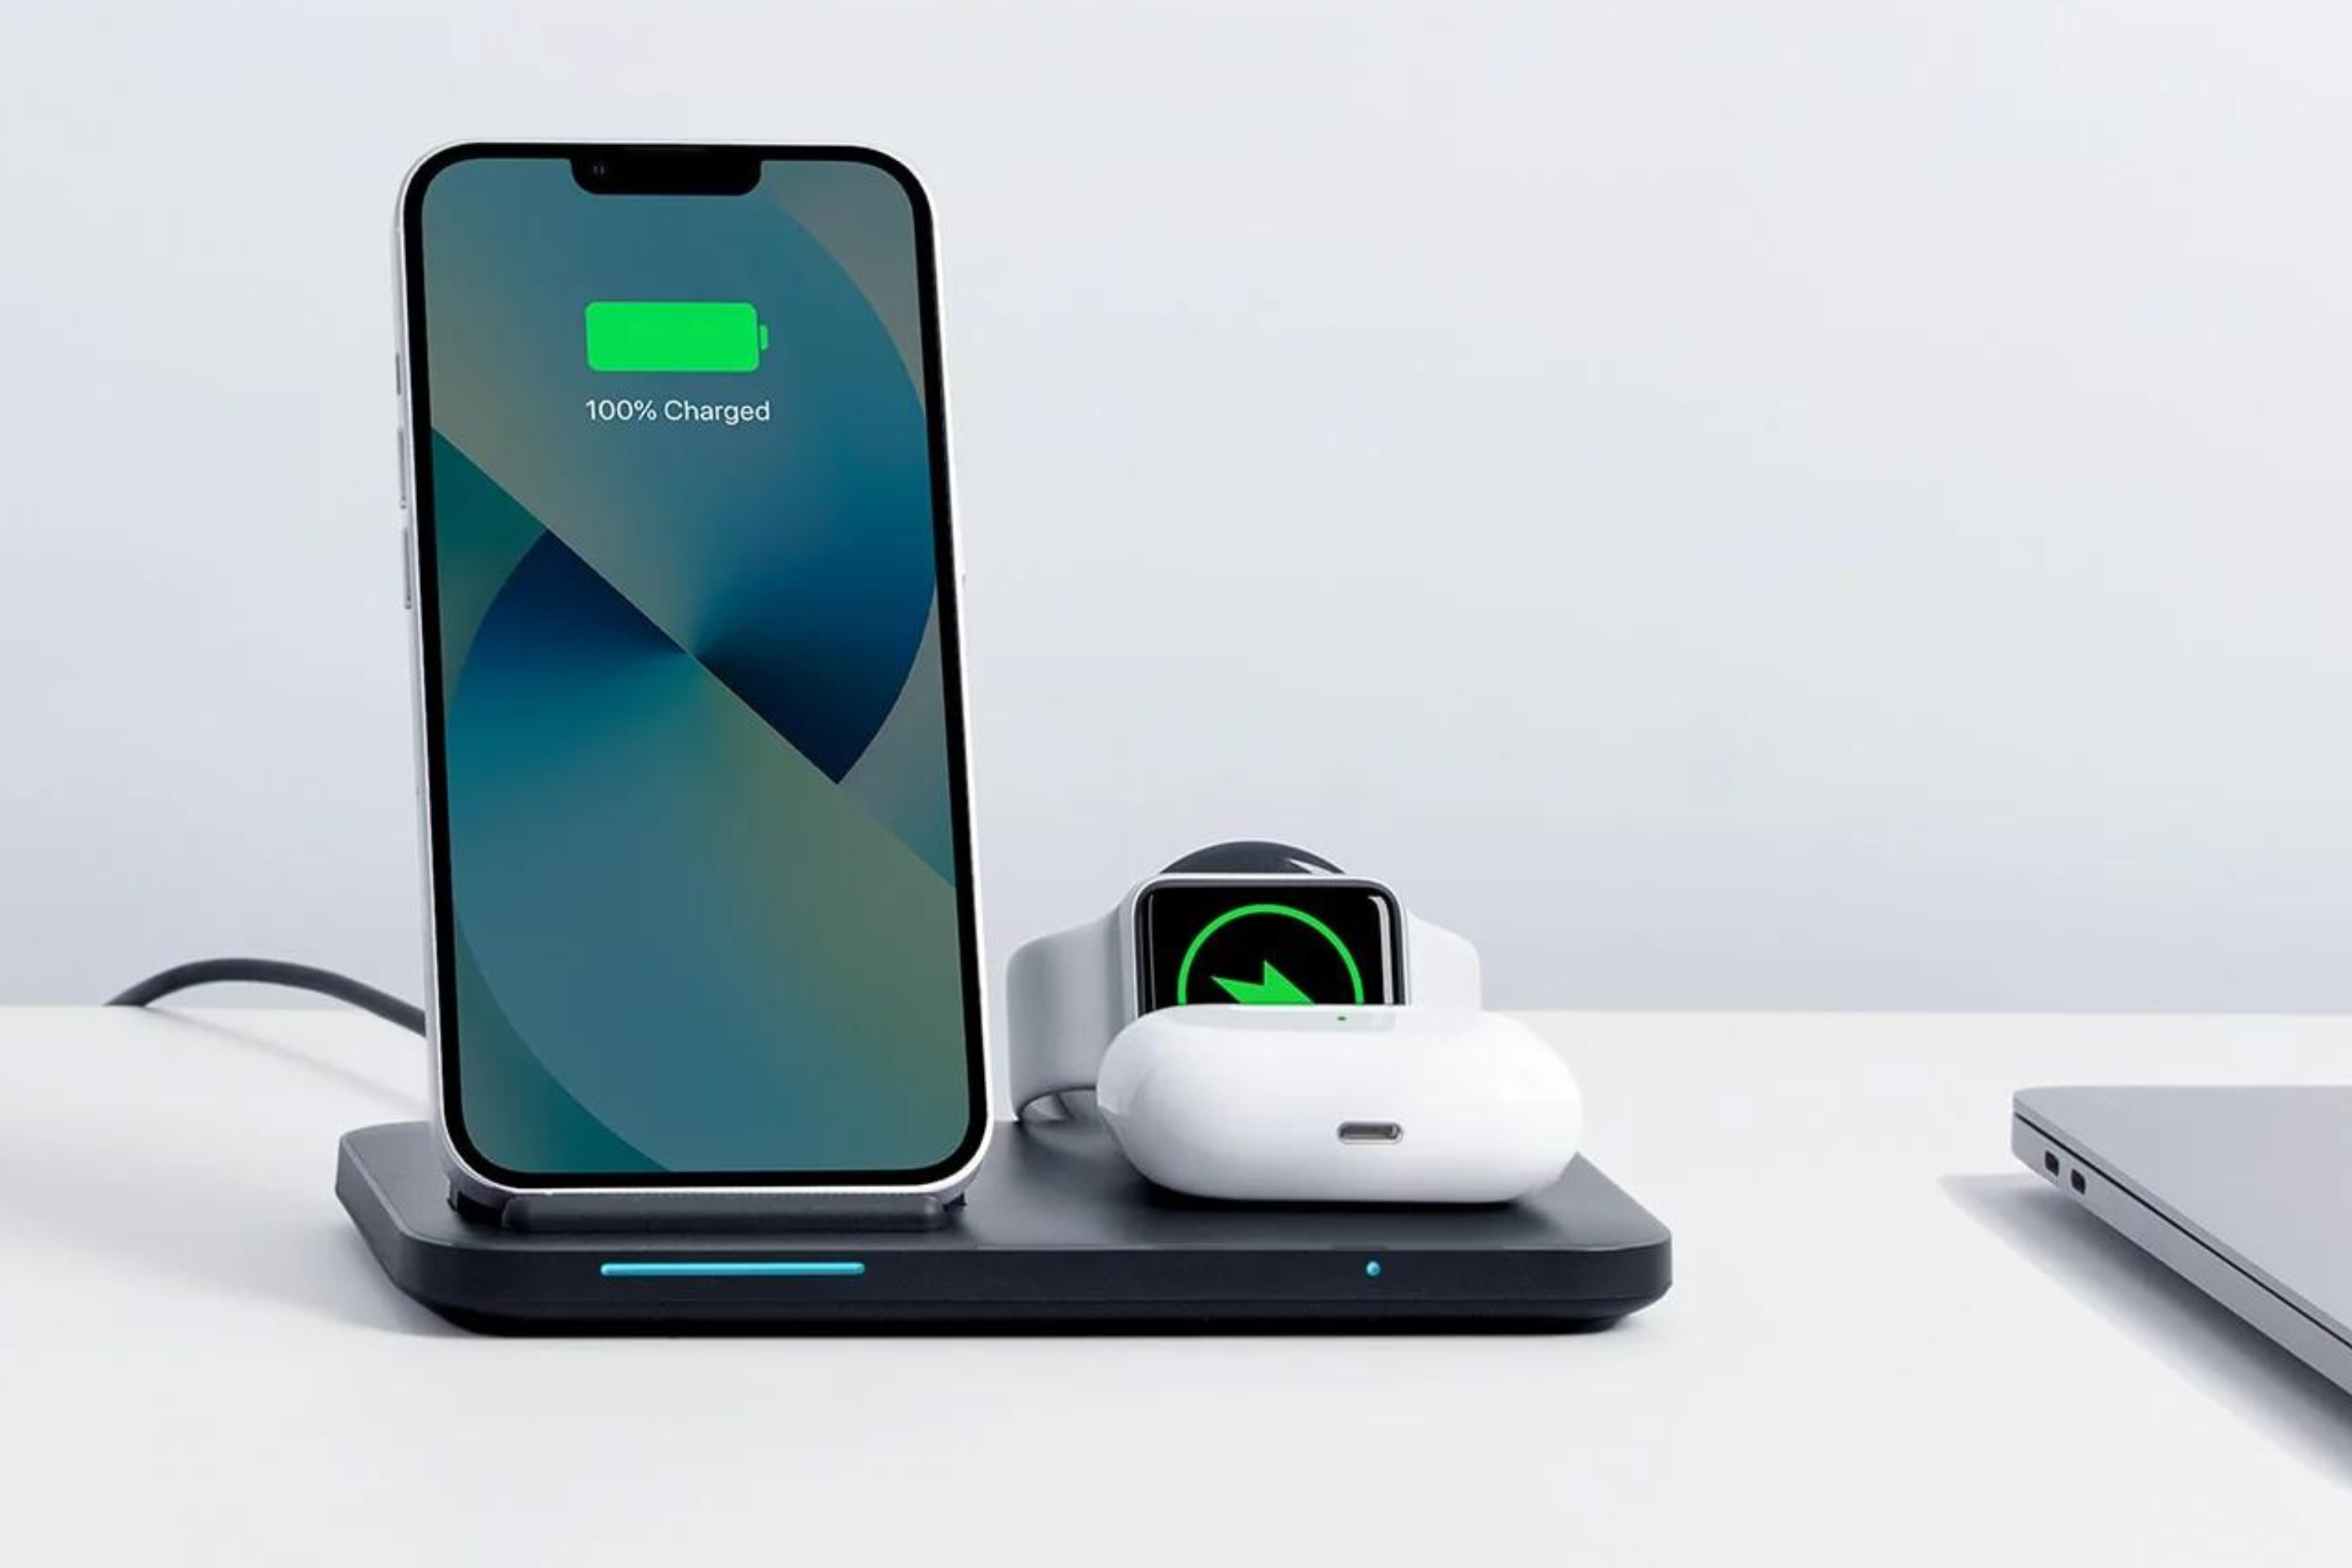 Anker 335 Wireless Charger with phone, earbuds, and watch